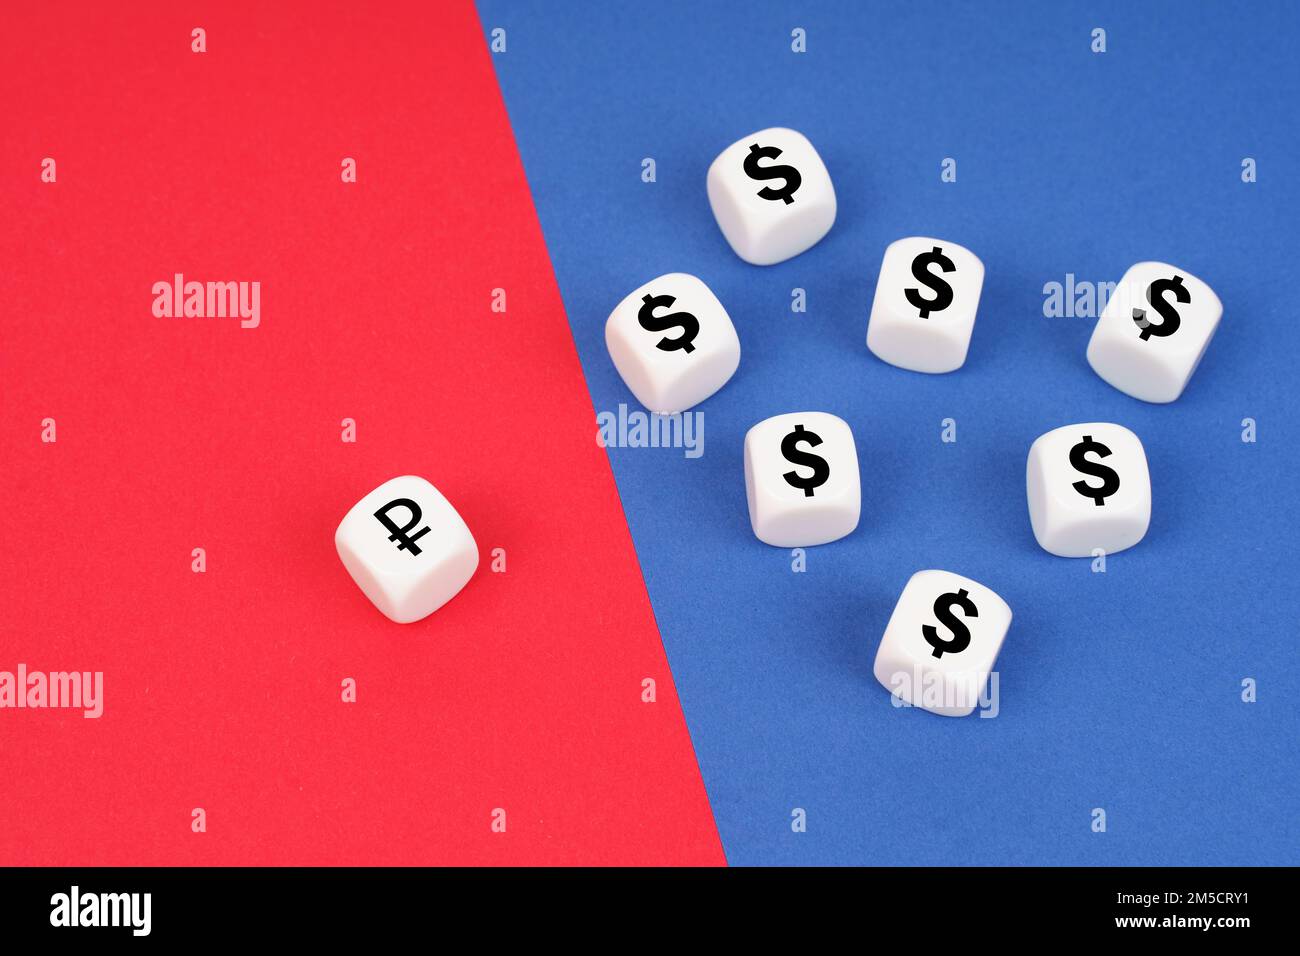 Business concept. On a red background, one cube with a ruble symbol, on a blue one, cubes with a dollar symbol. Stock Photo